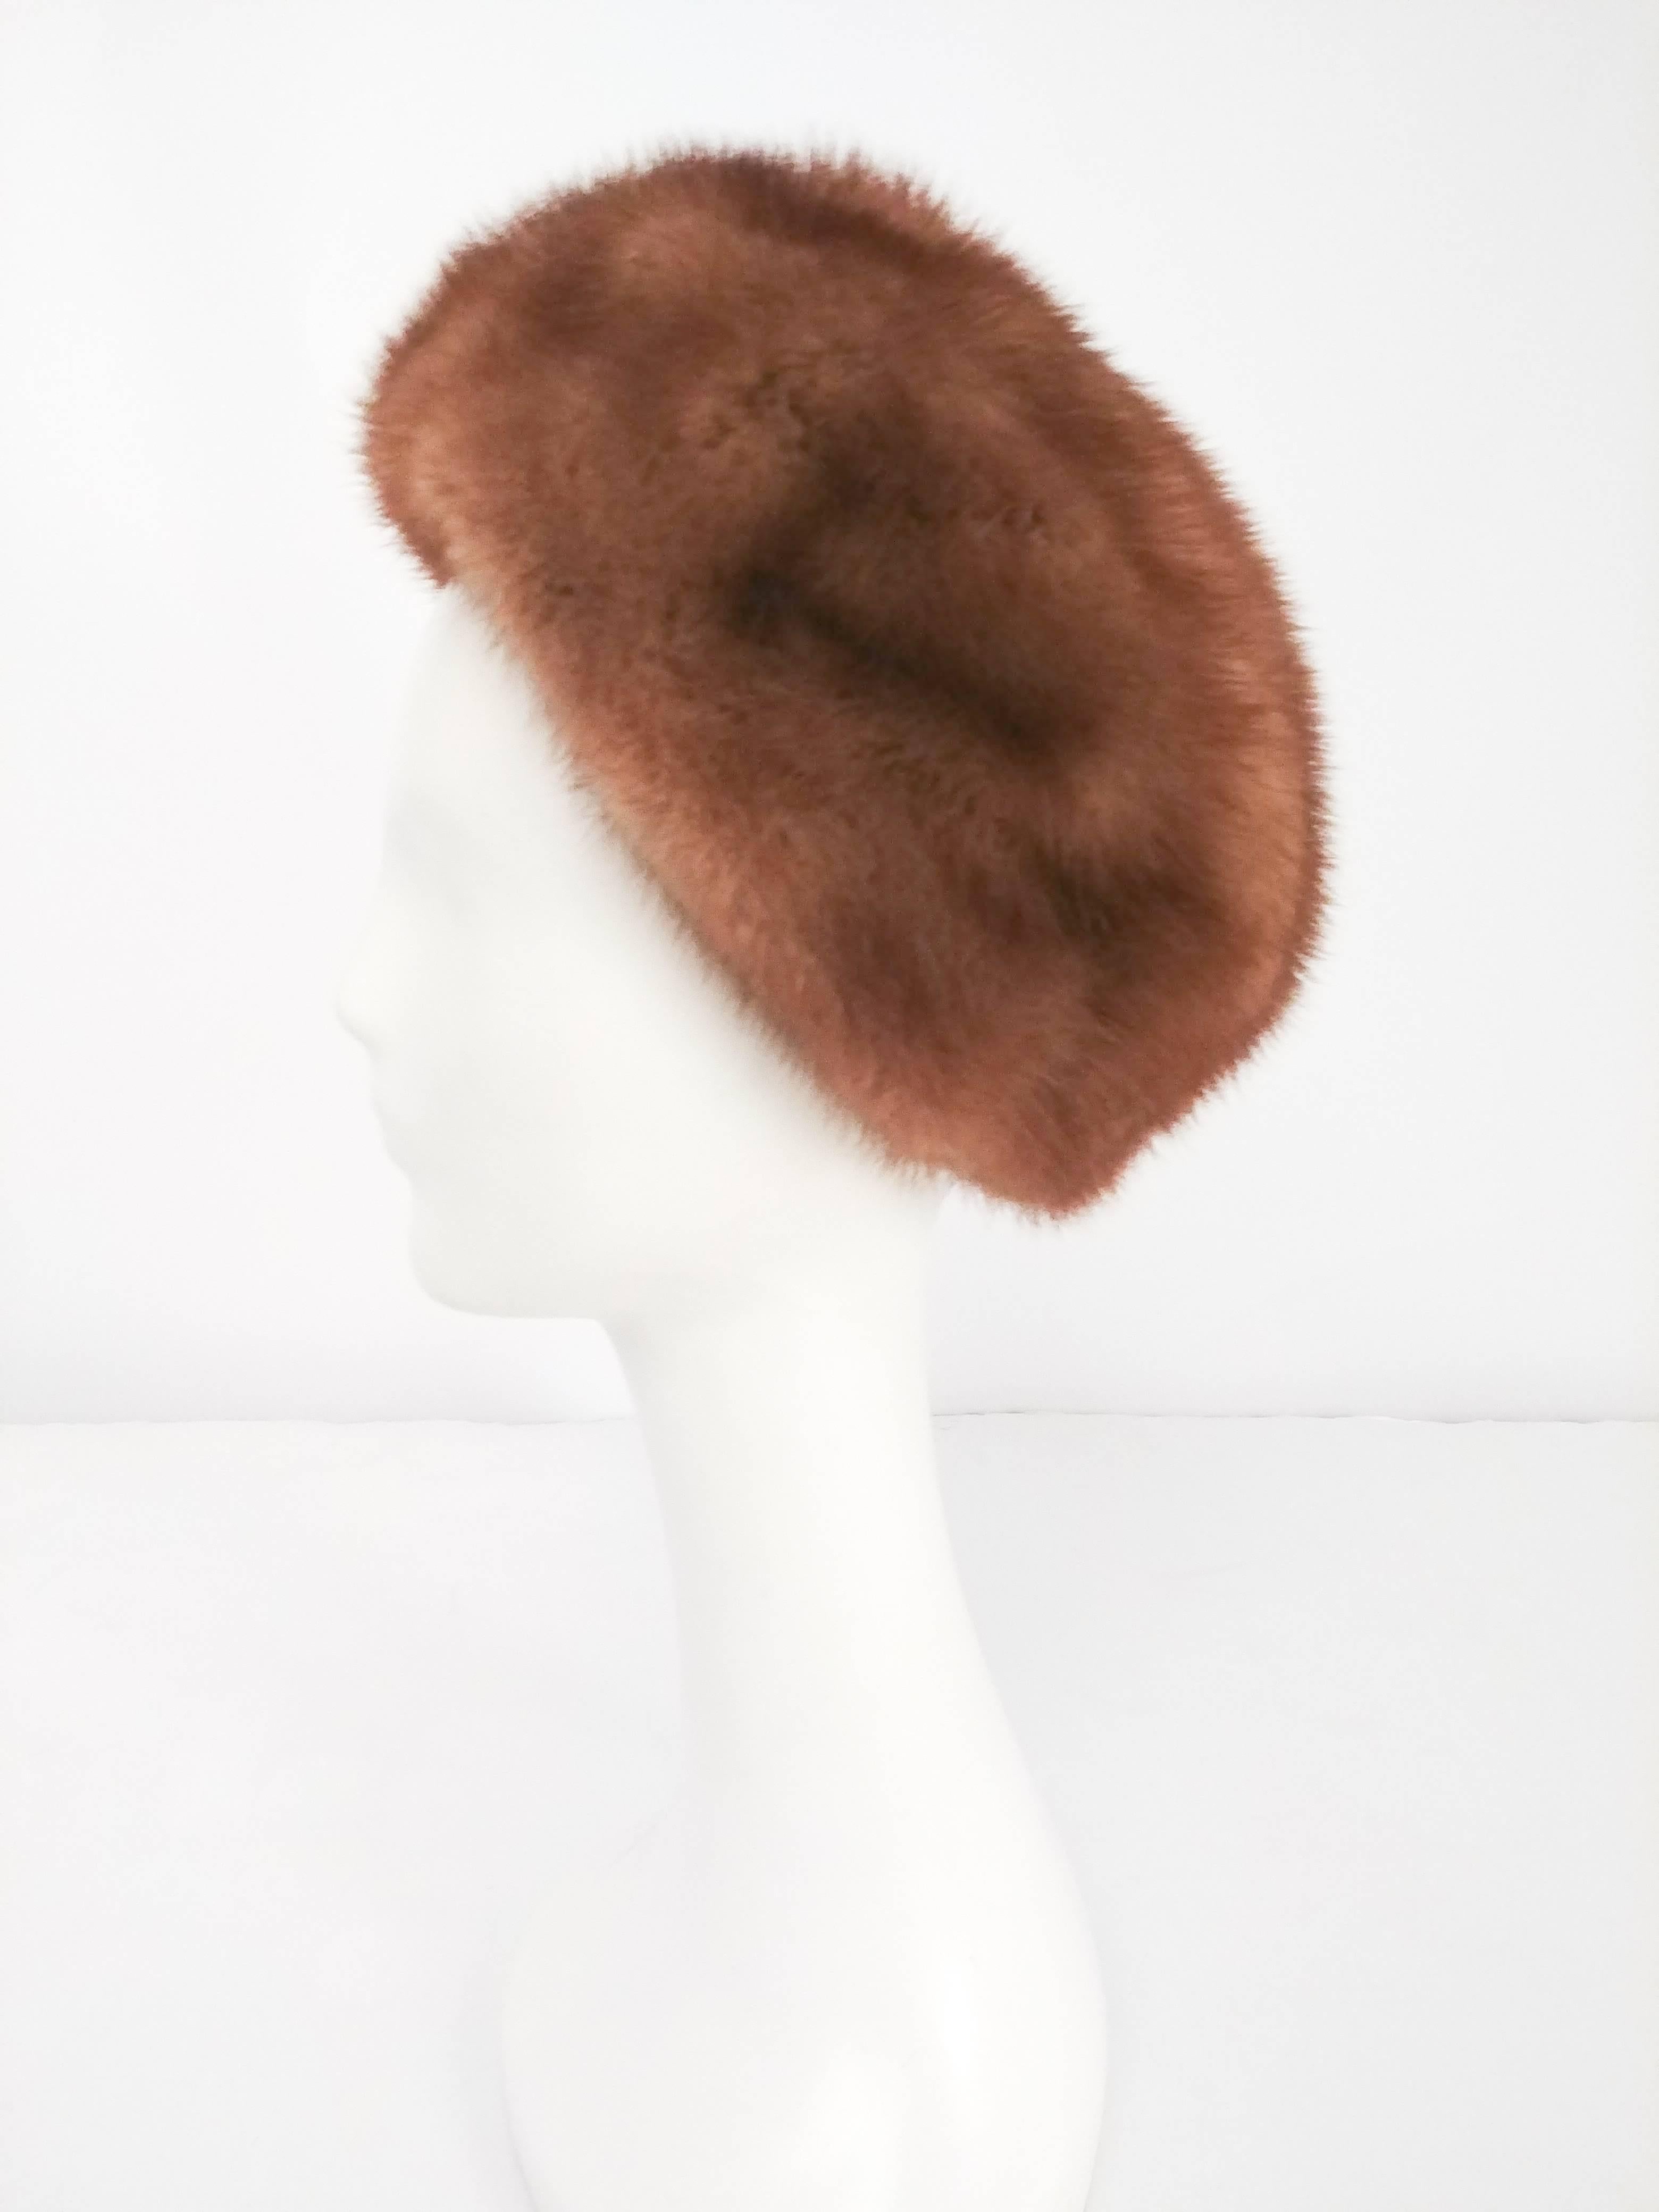 1960s Light Brown Mink Fur Hat. Round beret shaped hat sits on back of head in classic 1960s style